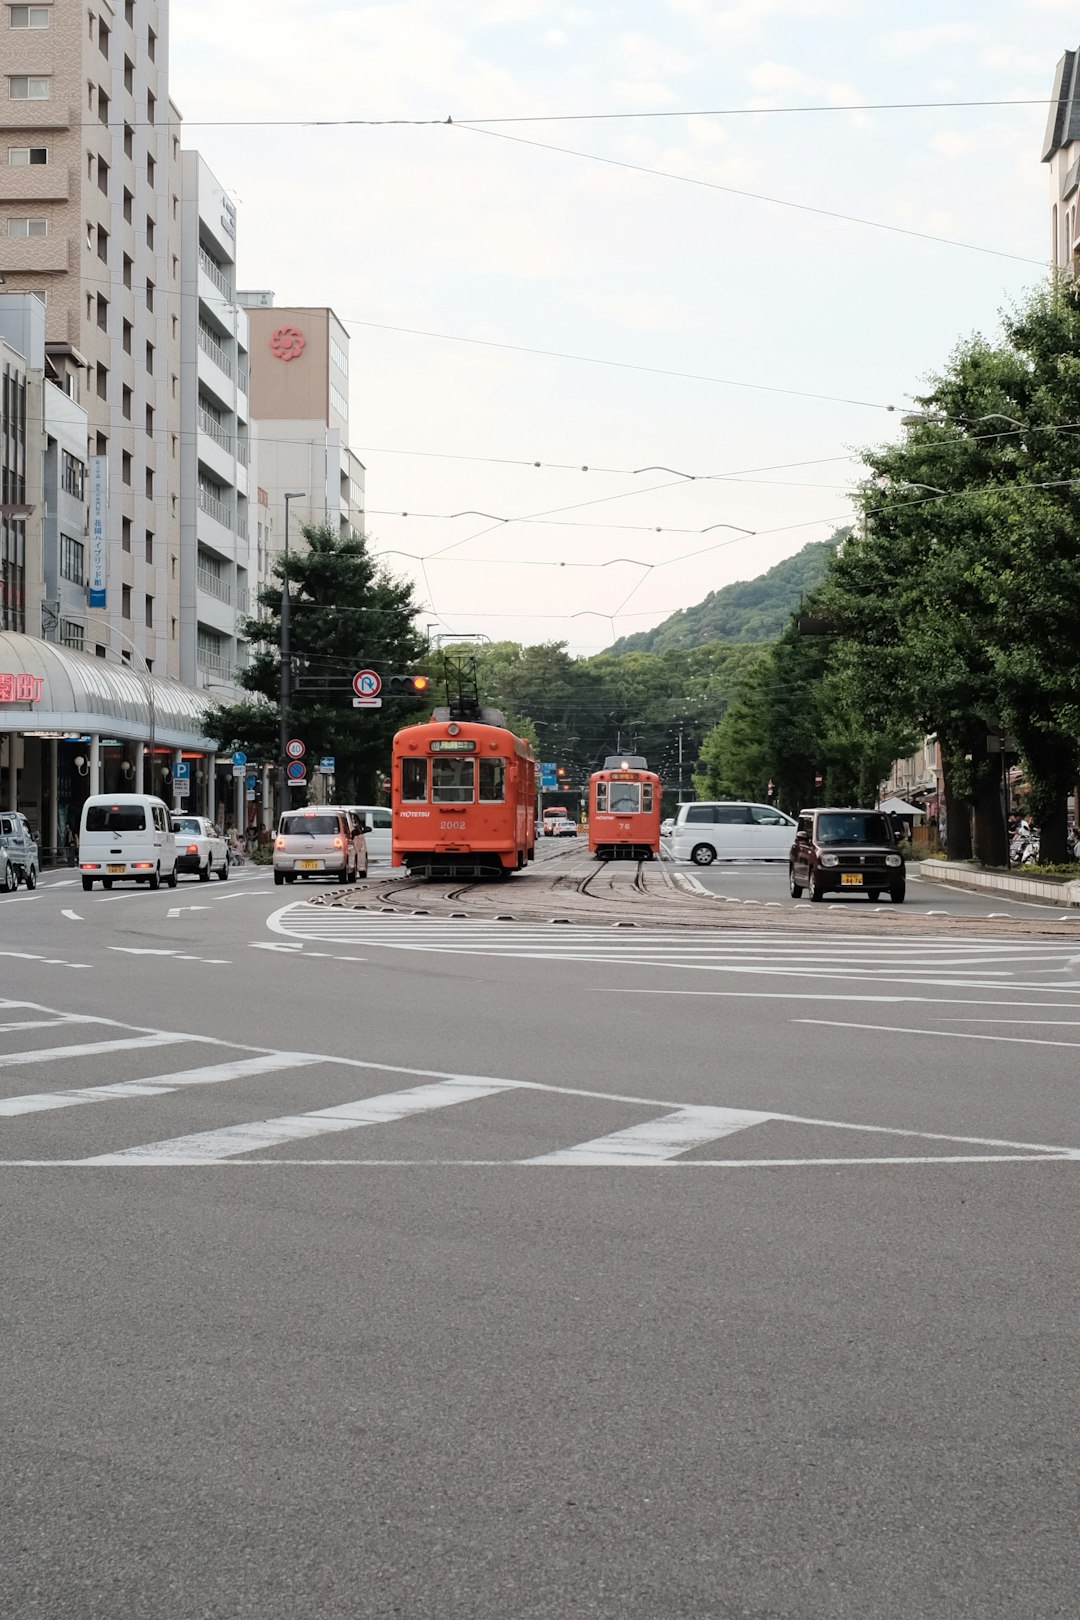 vehicle and tram during daytime